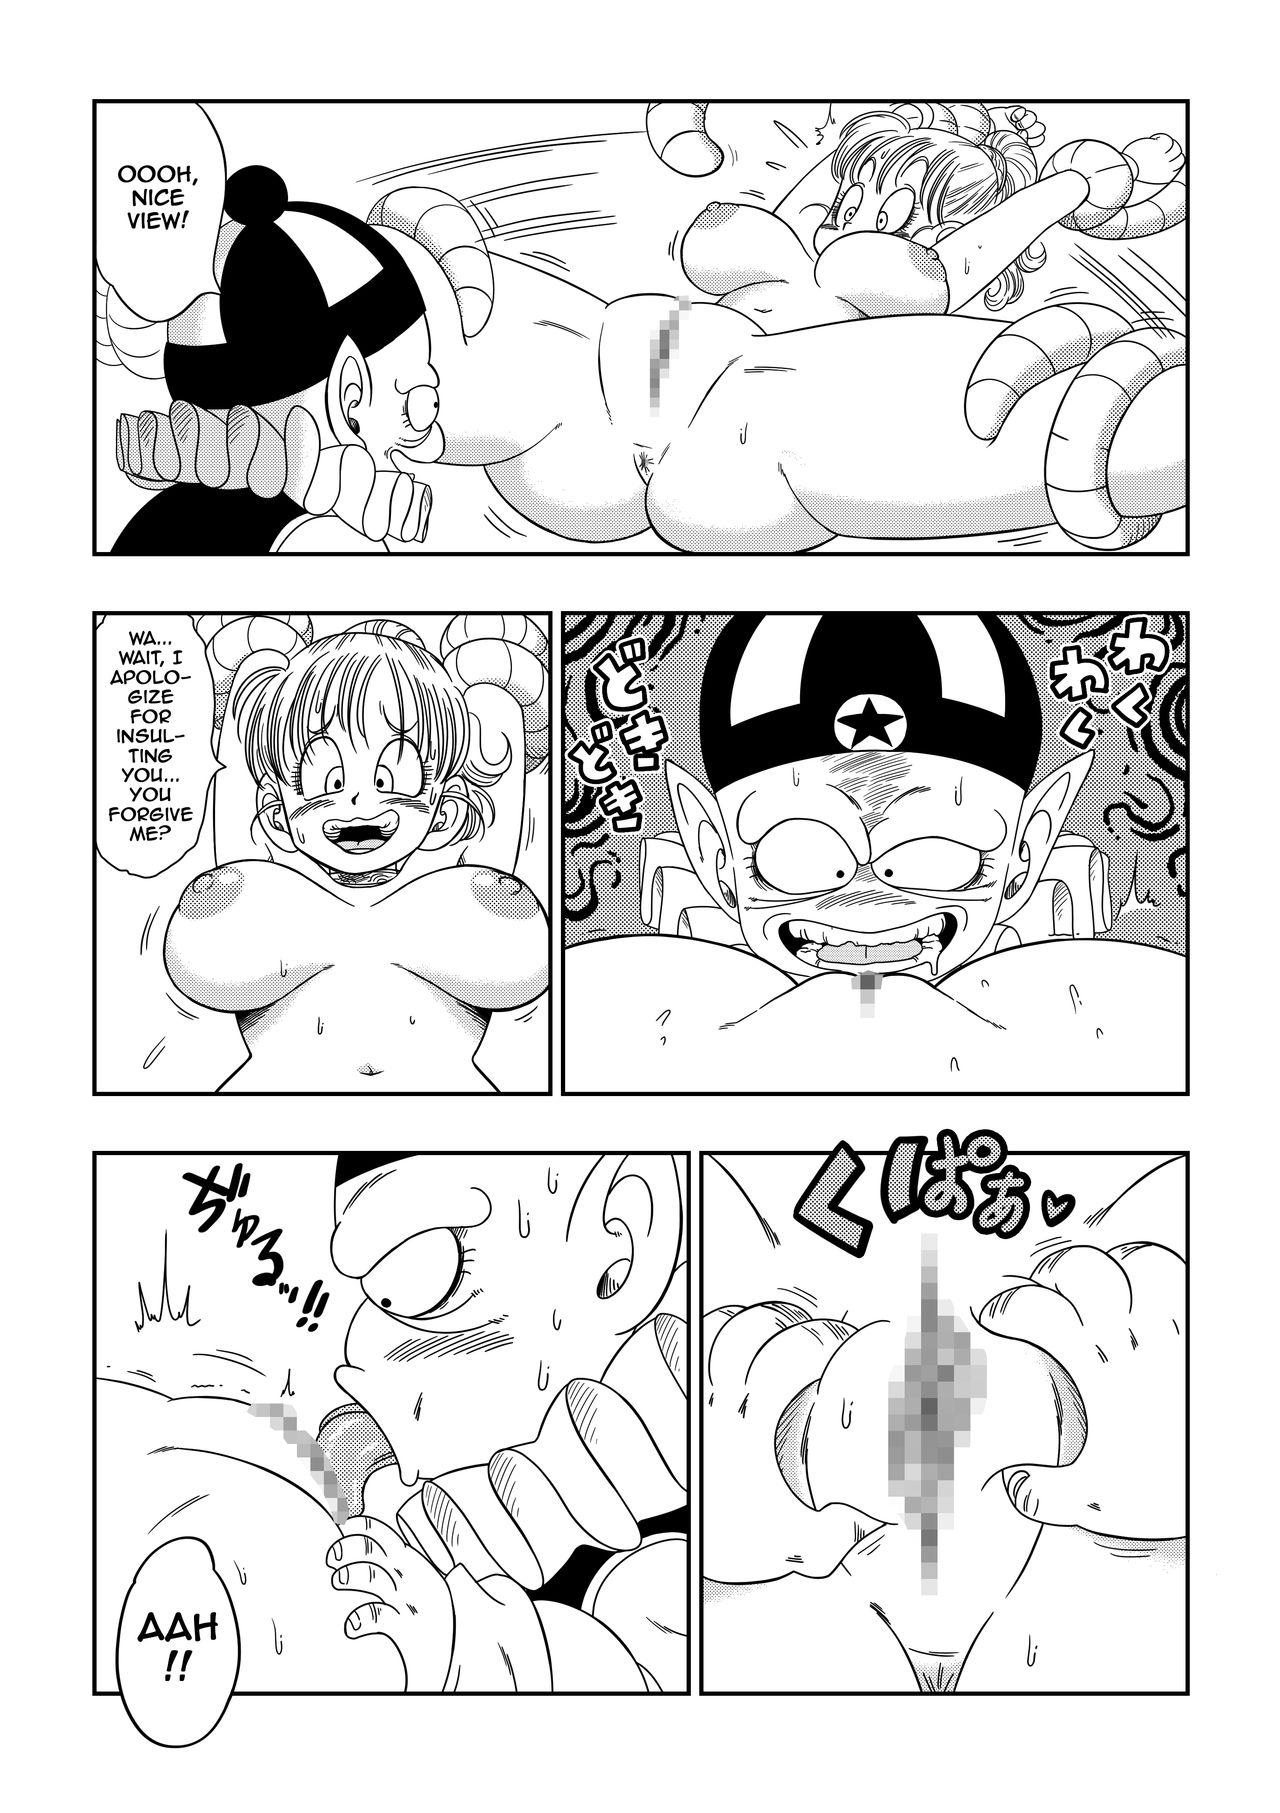 Boy Dagon Ball - Punishment in Pilaf's Castle - Dragon ball Tinytits - Page 6